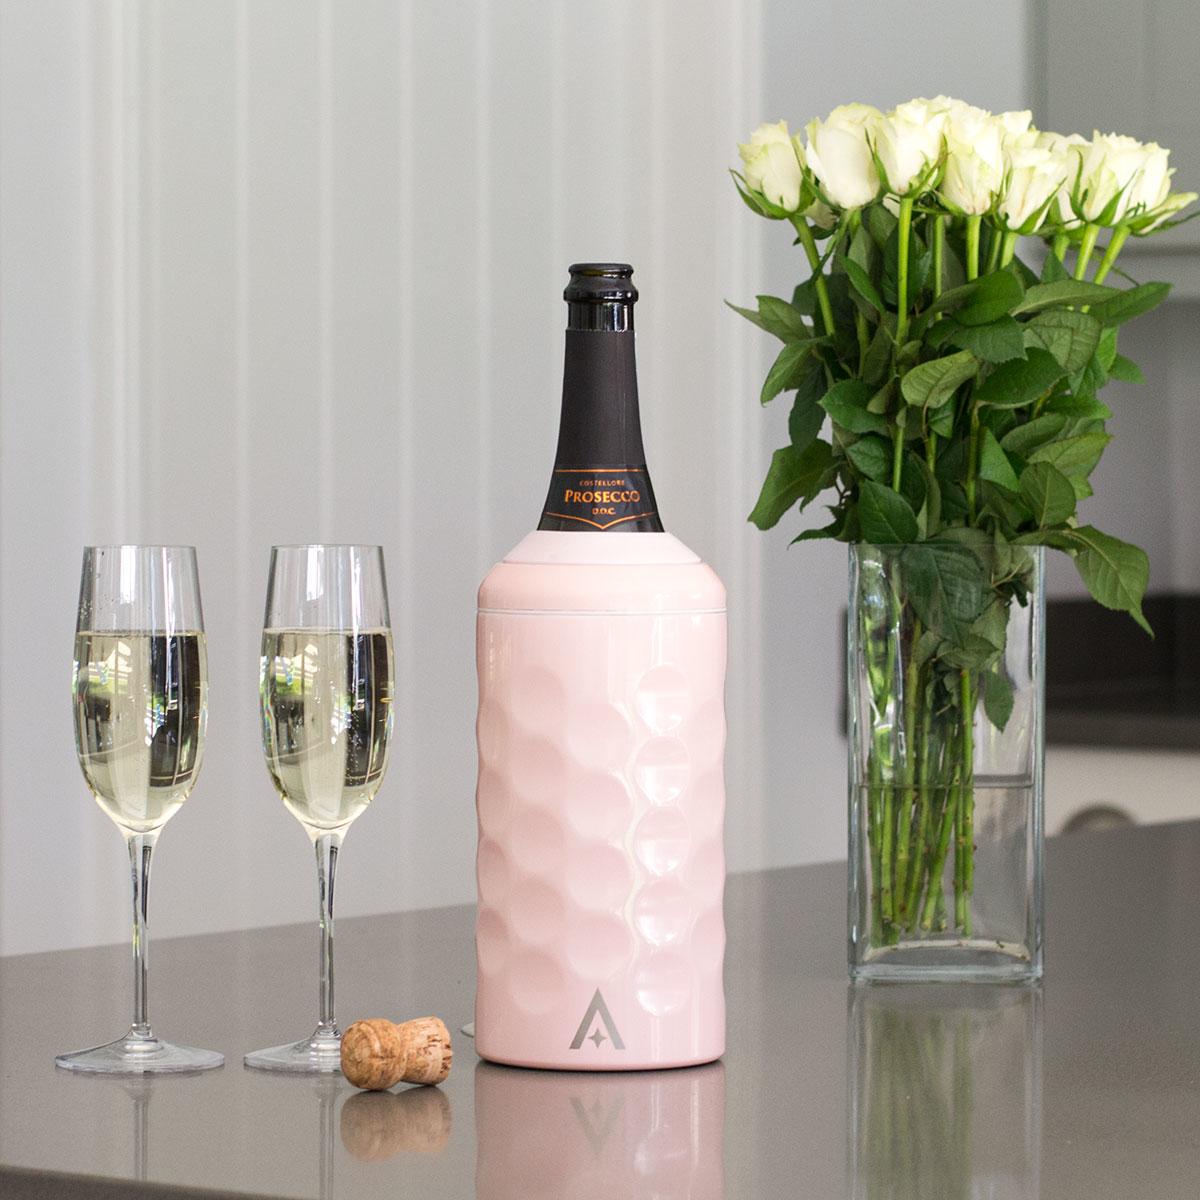 UBERSTAR Stainless Steel Wine and Champagne Bottle Cooler with Lid - Pink